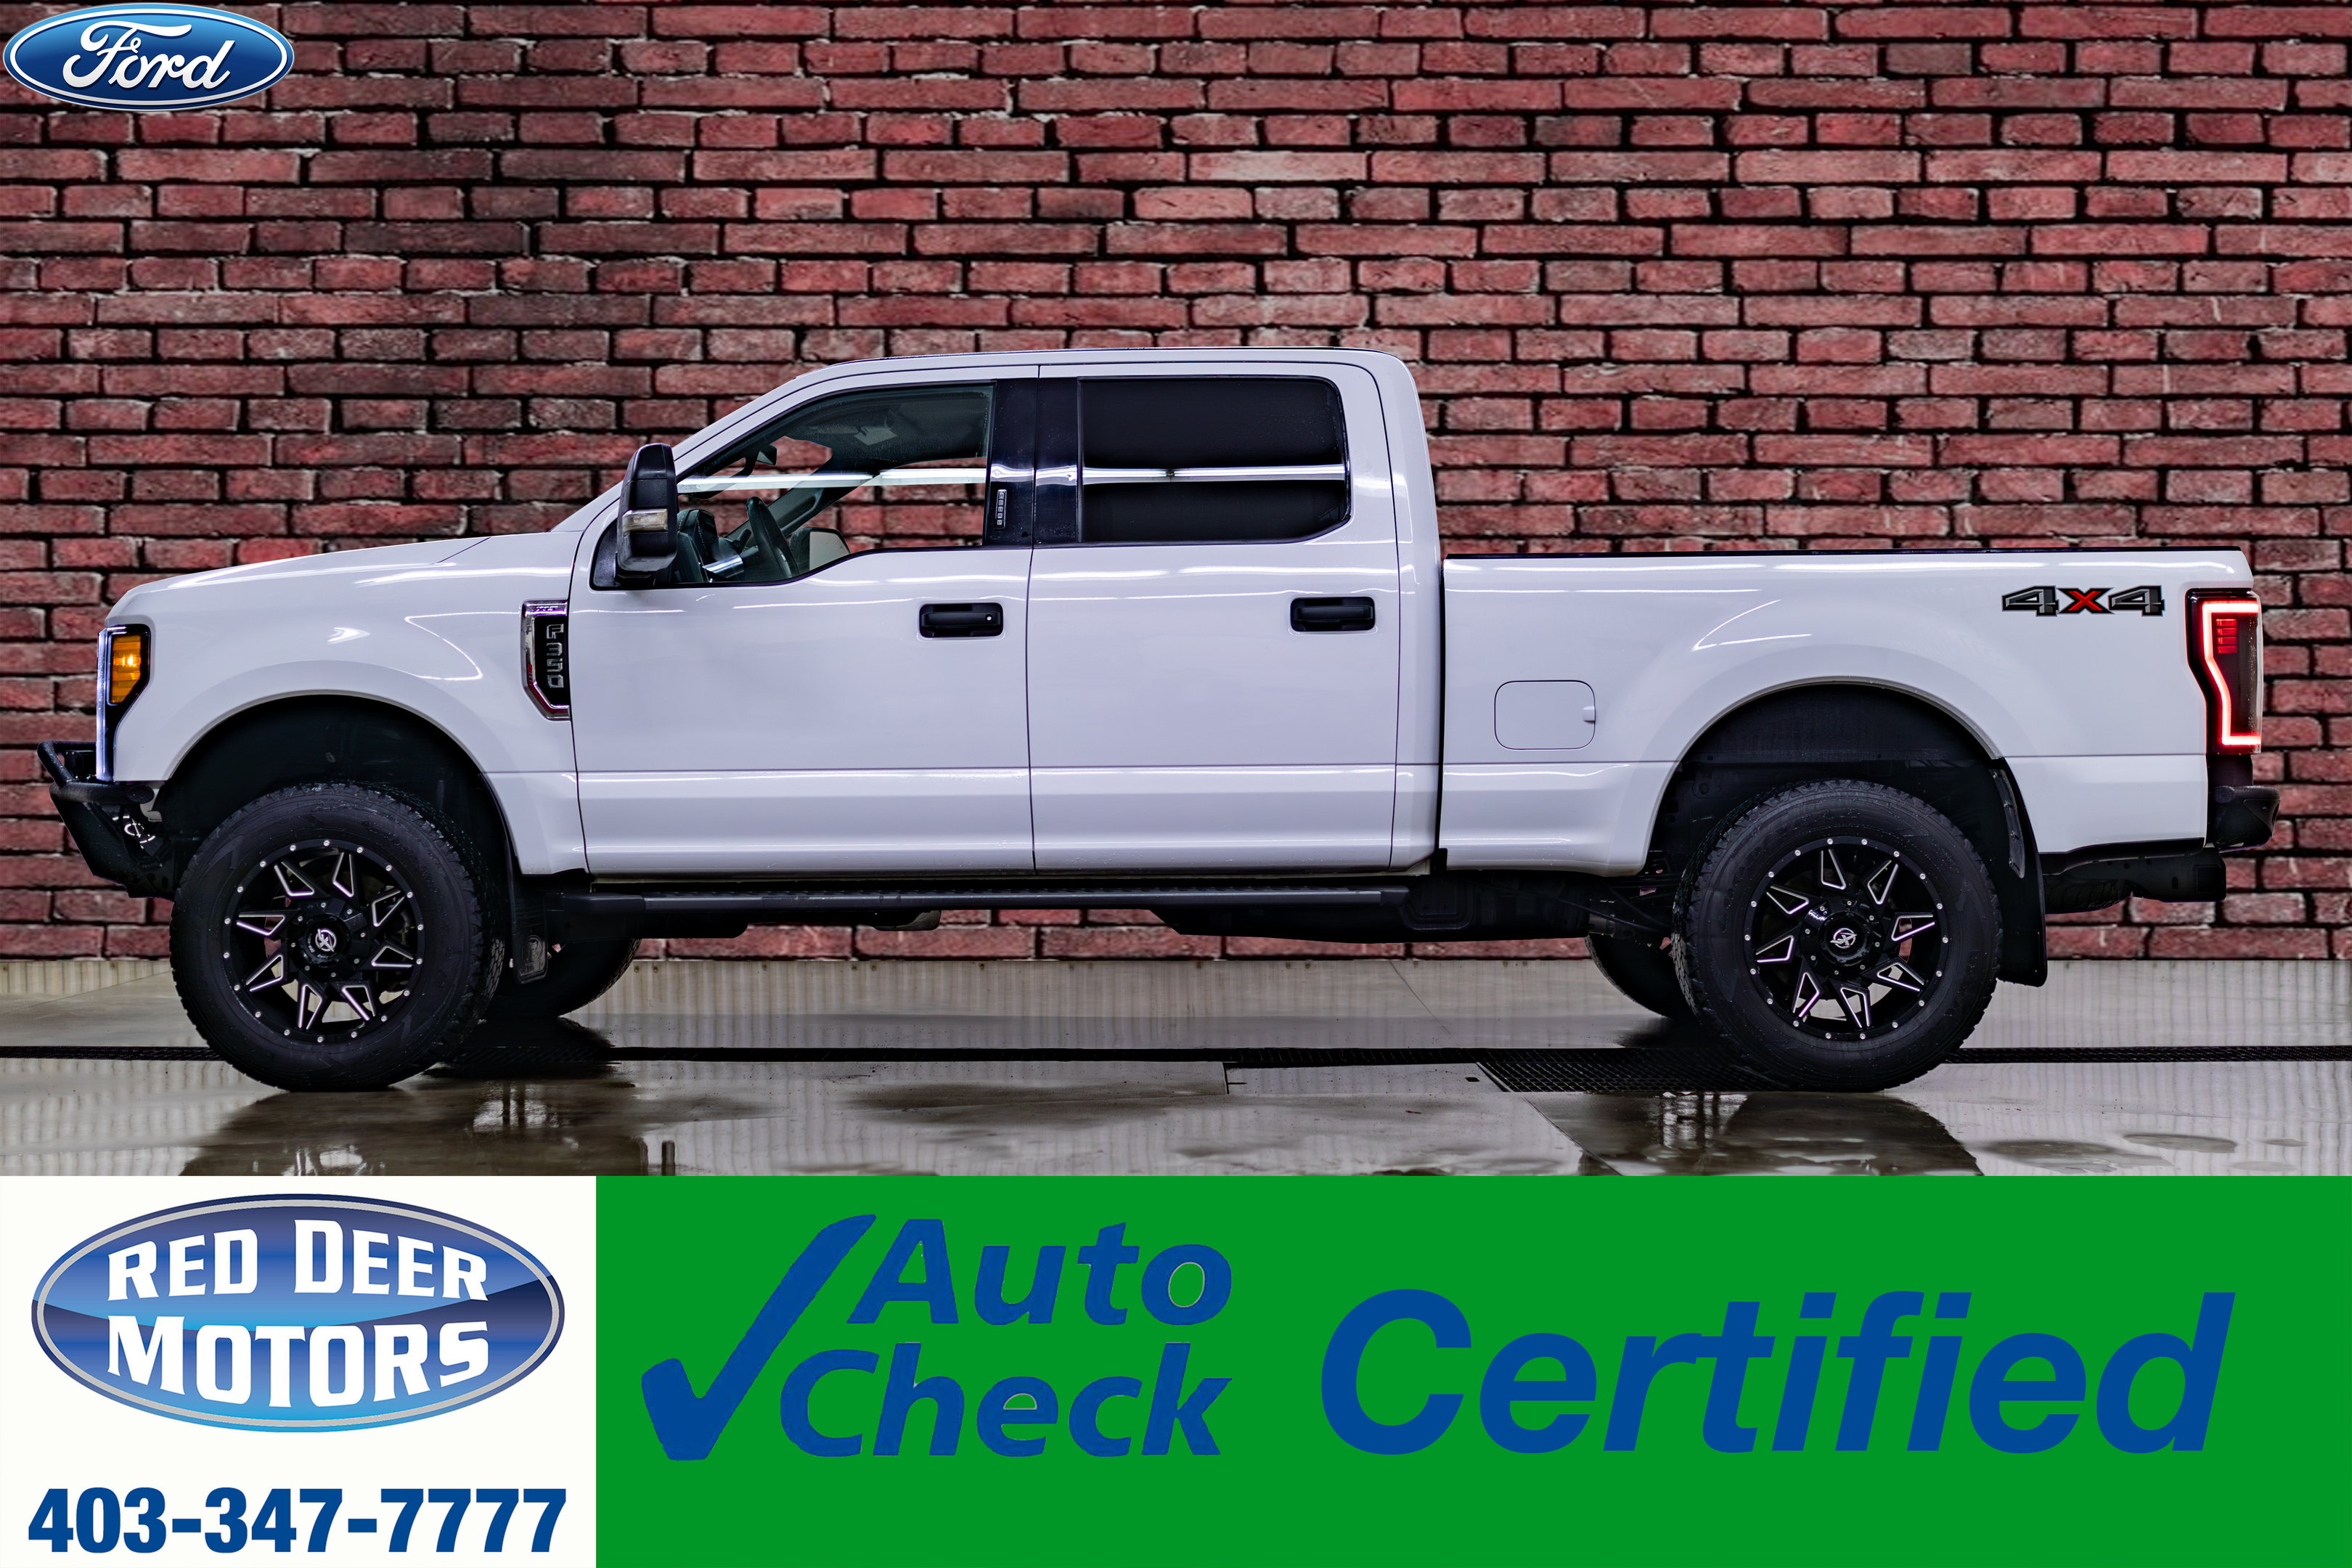 2019 Ford F-350 4x4 Crew Cab XLT Leather Aftermarket Exhaust